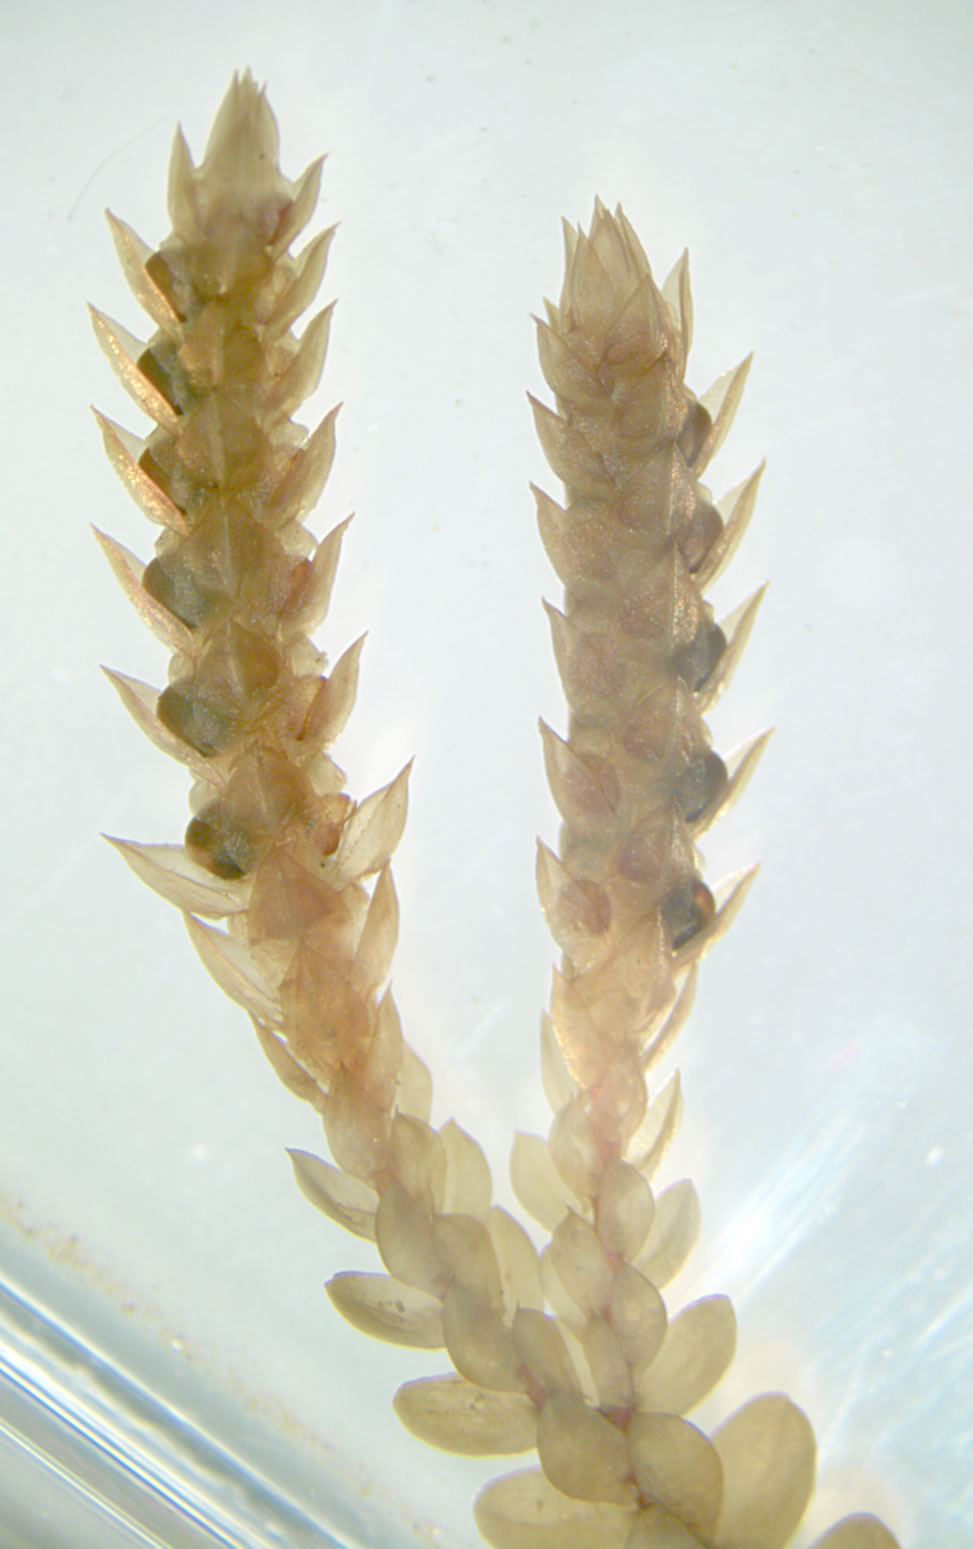 Two Selaginella strobili with different looking sporangia